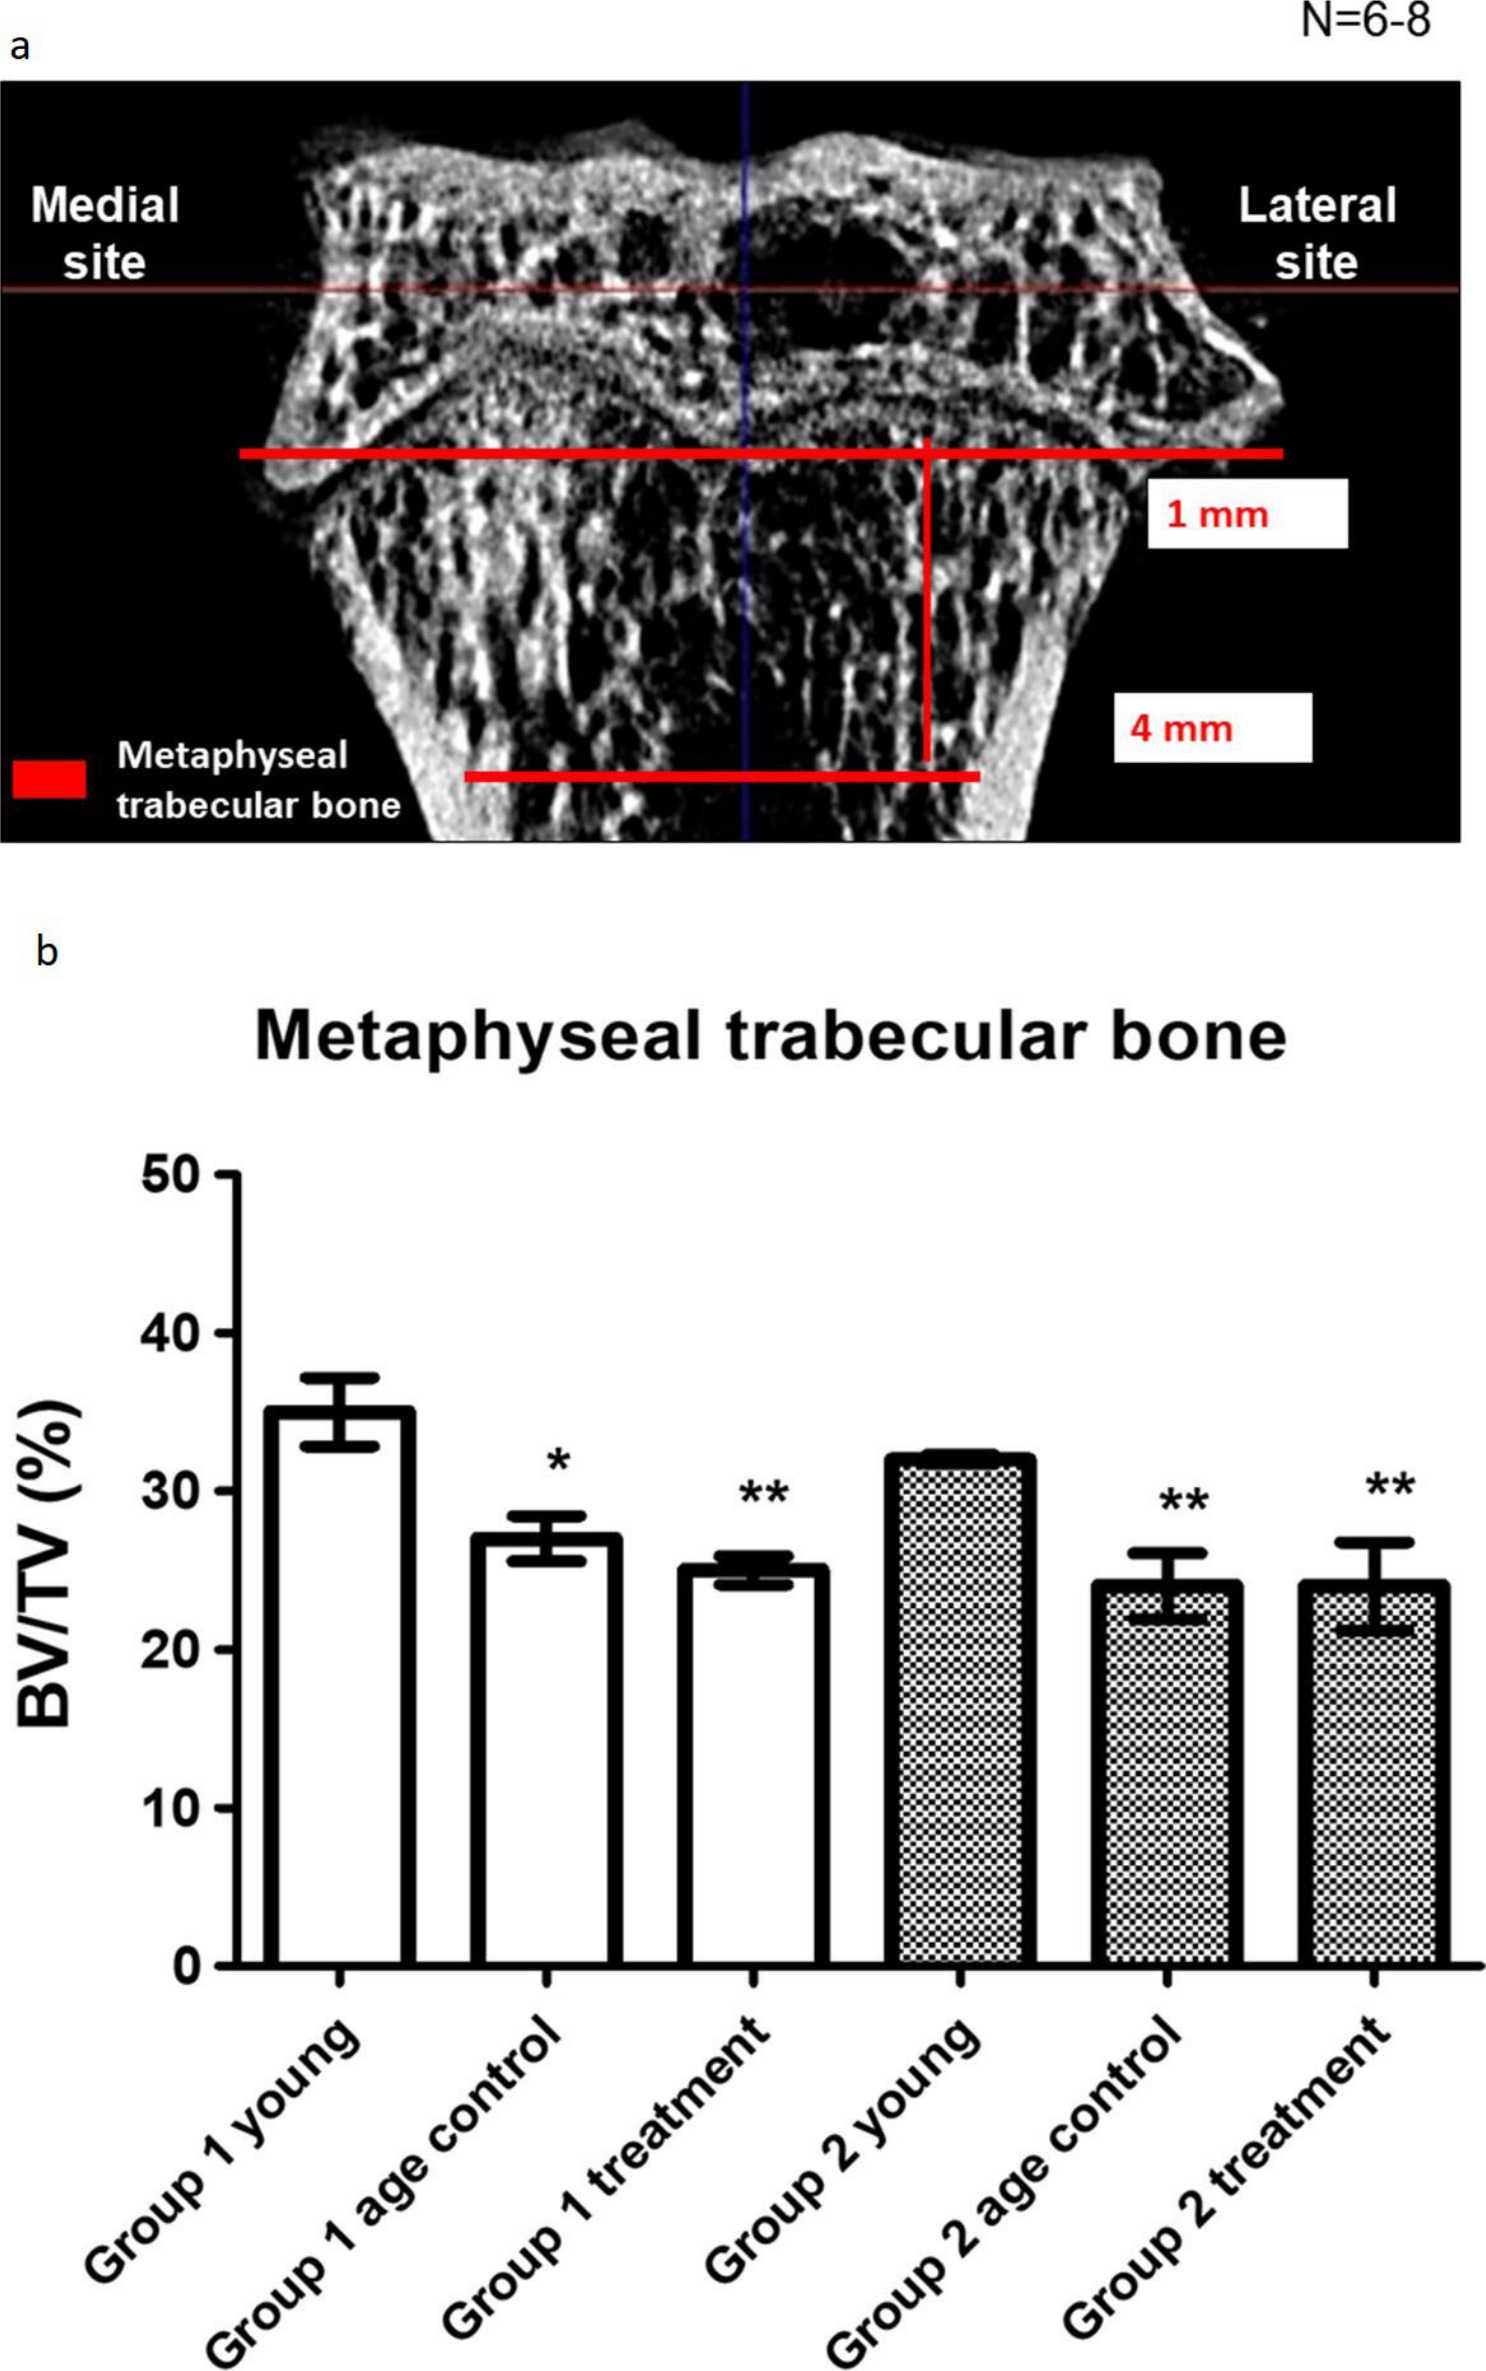 Fig. 5 
            a) Definition of bone microarchitecture measurement metaphyseal trabecular bone microarchitecture in microcalculated tomography (μCT). At the age of six months (Group 1), guinea pigs were assigned into a control (Group 1 control; n = 7) or osteoarthritis (OA) with parathyroid hormone (PTH) (1-34) treatment (Group 1 treatment) group (n = 8). Another eight three-month-old guinea pigs were purchased and served as the young control group (Group 1 young; n = 8). Guinea pigs at seven months old (Group 2) were randomized into either the control (Group 2 control; n = 6) or OA with PTH (1-34) treatment (Group 2 treatment) group (n = 6). Another eight four-month-old guinea pigs were purchased and served as the young control group (Group 2 young; n = 8). All guinea pigs received treatment once per week for three months. b) The quantifications of metaphyseal trabecular volume are shown. Bone volume (BV)/total volume (TV) ratio declined with ageing. There was no significant difference after PTH (1-34) treatment in the same group. Each bar represents the mean and standard error of the mean of samples in each group. *p < 0.05 versus Group 1 young group. **p < 0.01 versus Group 1 young group.
          